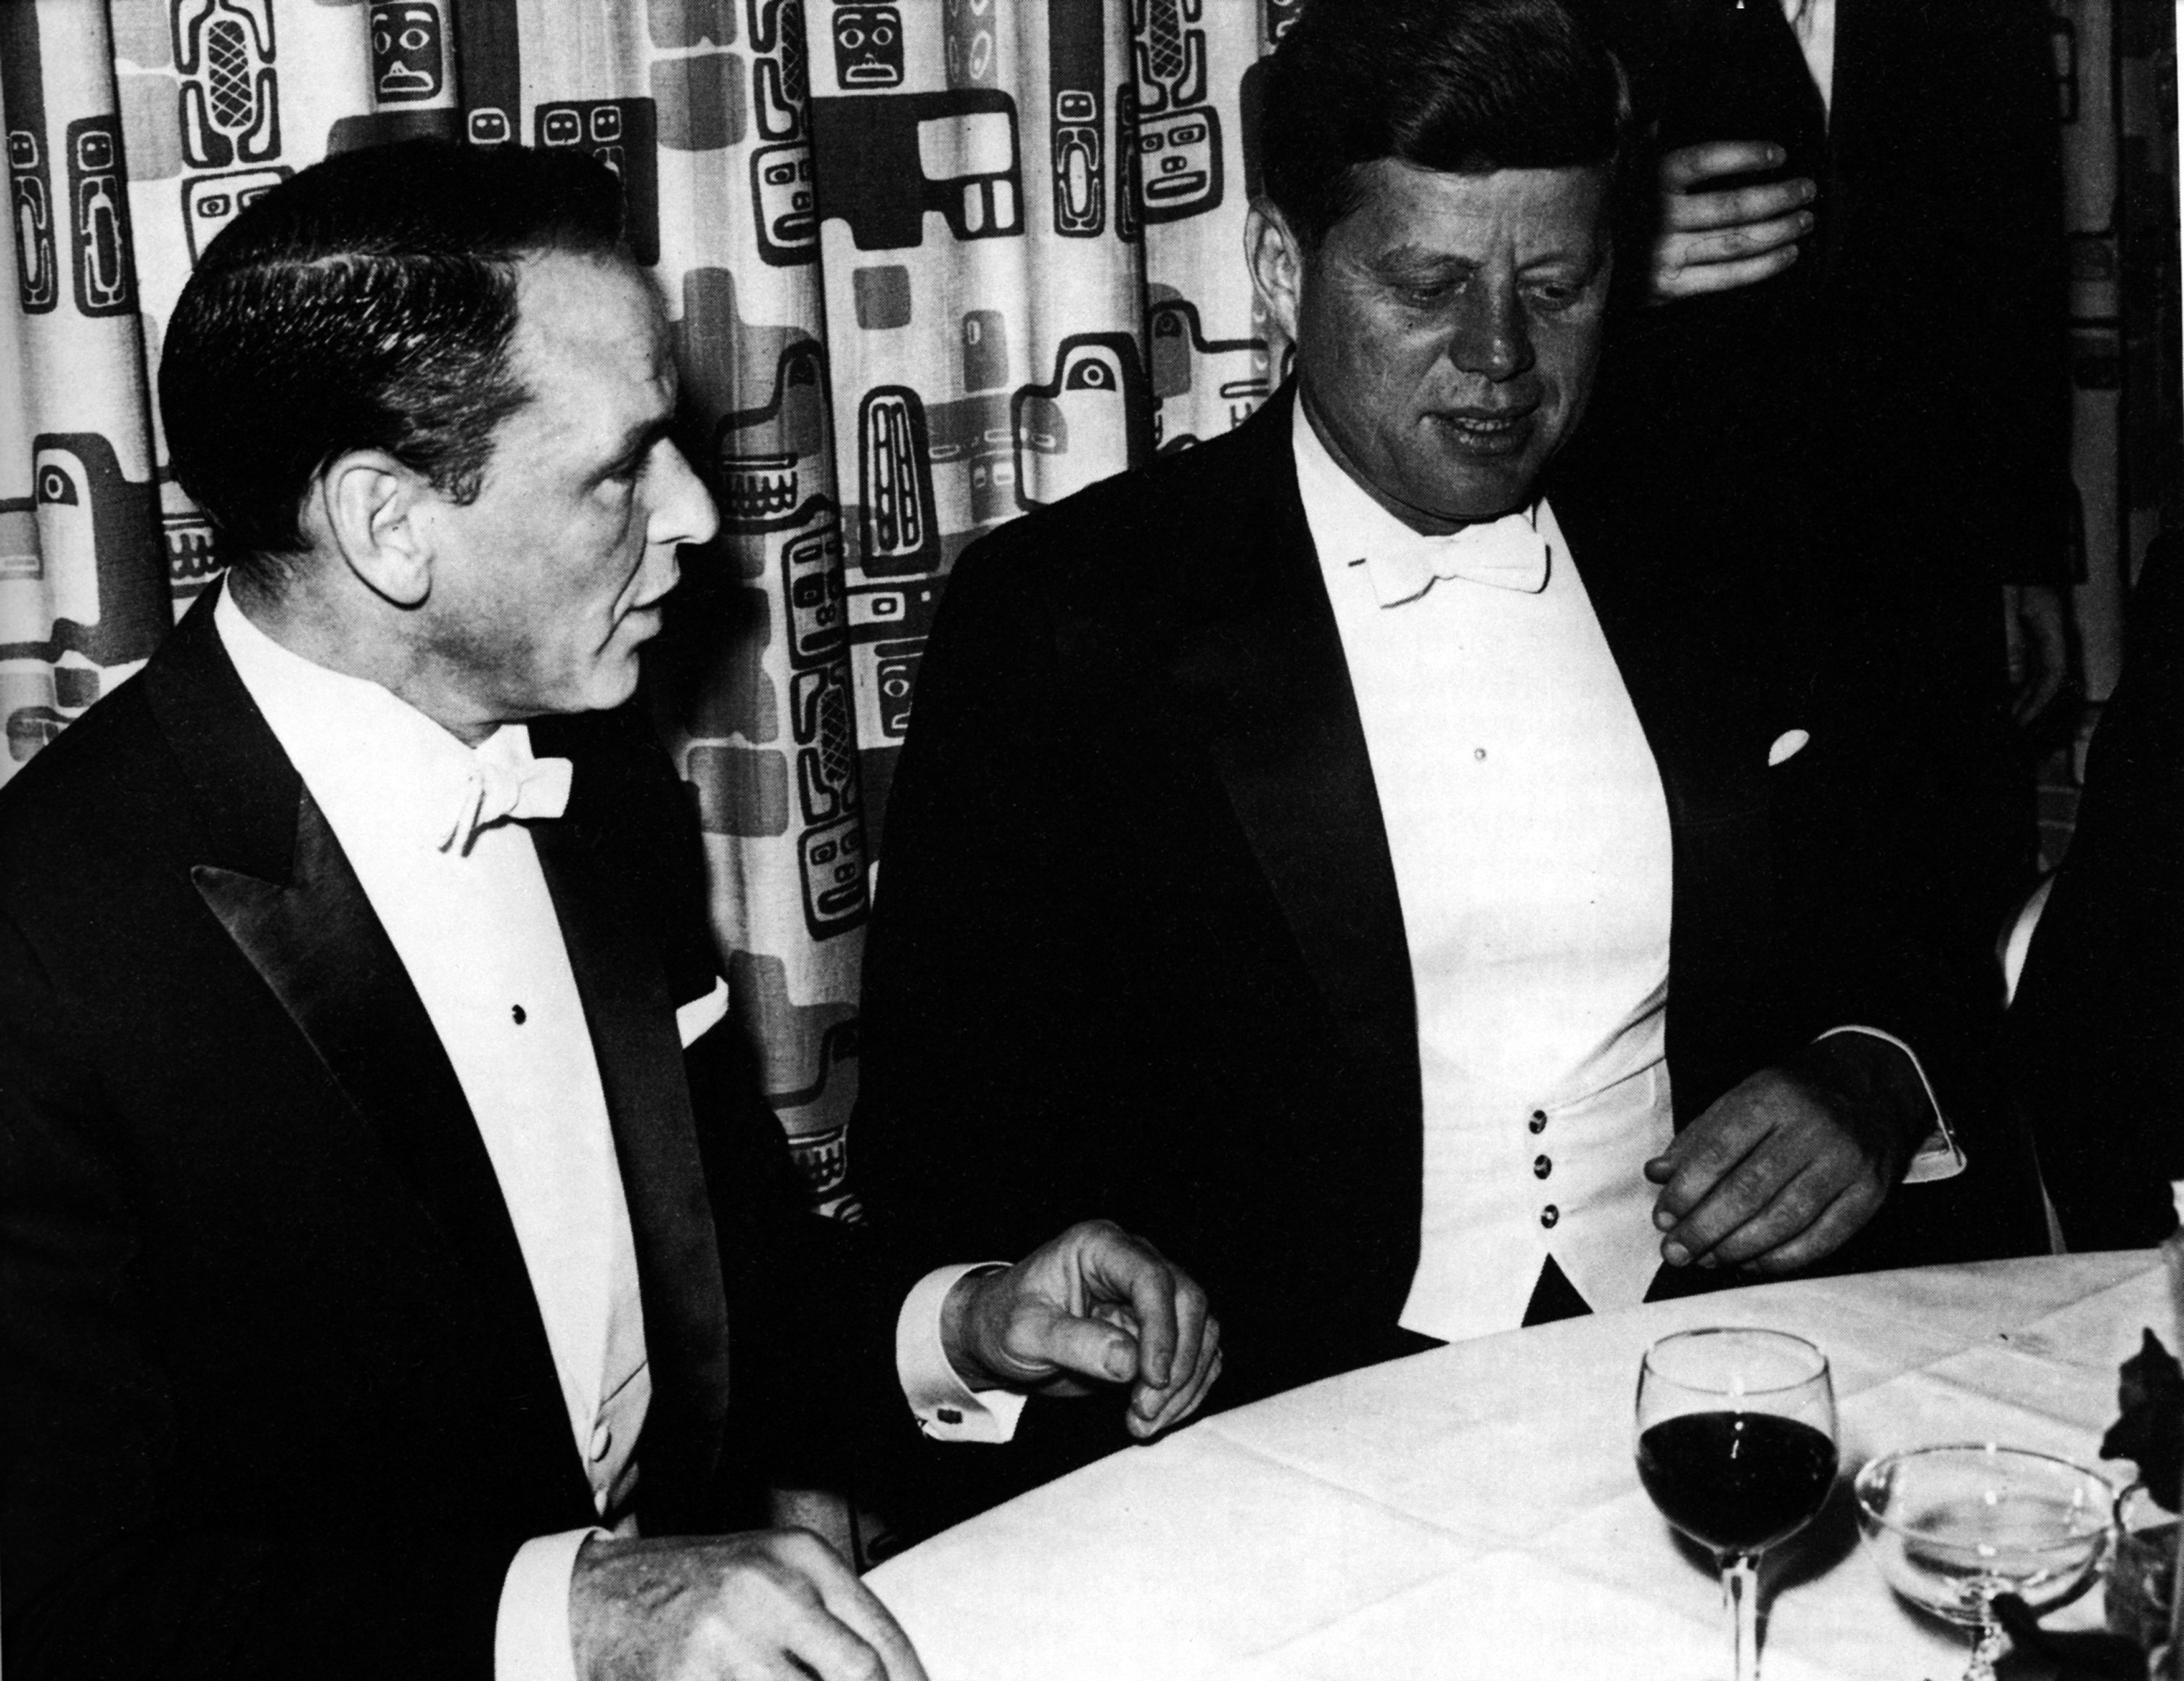 Frank Sinatra and John F. Kennedy sitting at a table together